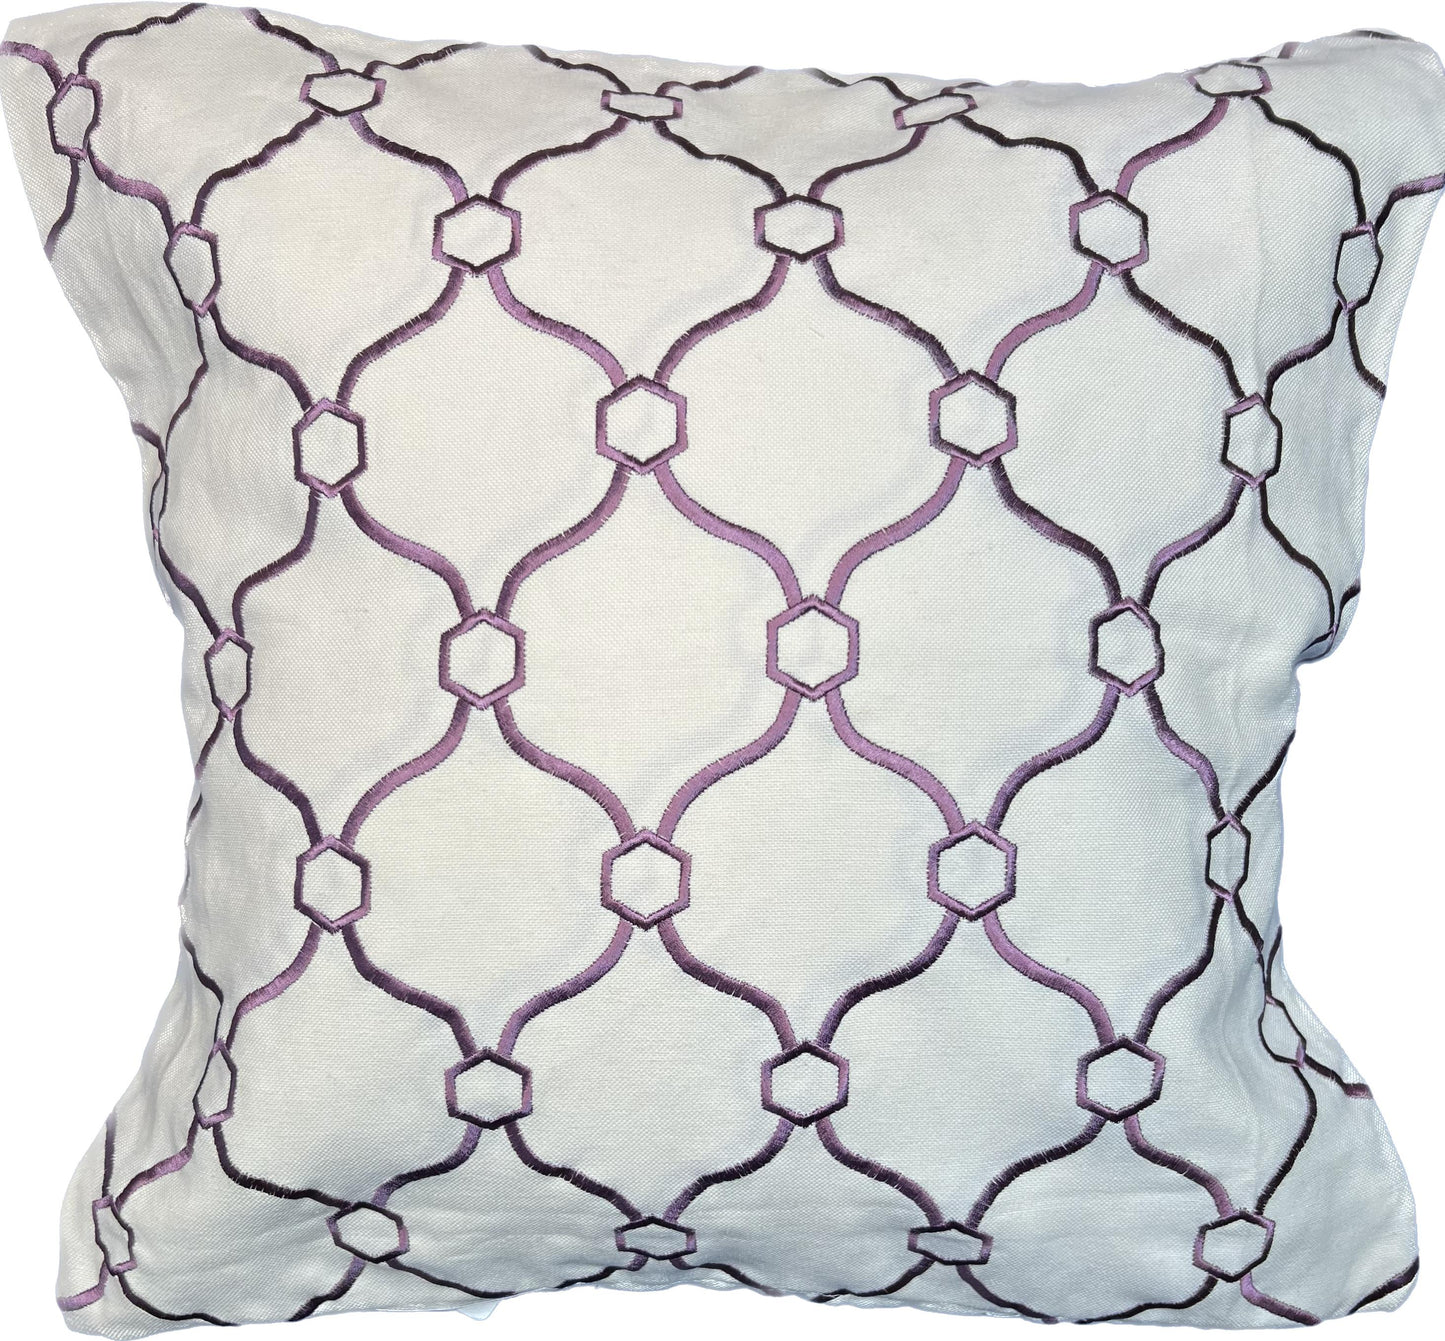 20"x20" Geometric Embroidery Pillow Cover (RM Coco: Picardie Trellis - Lilac)